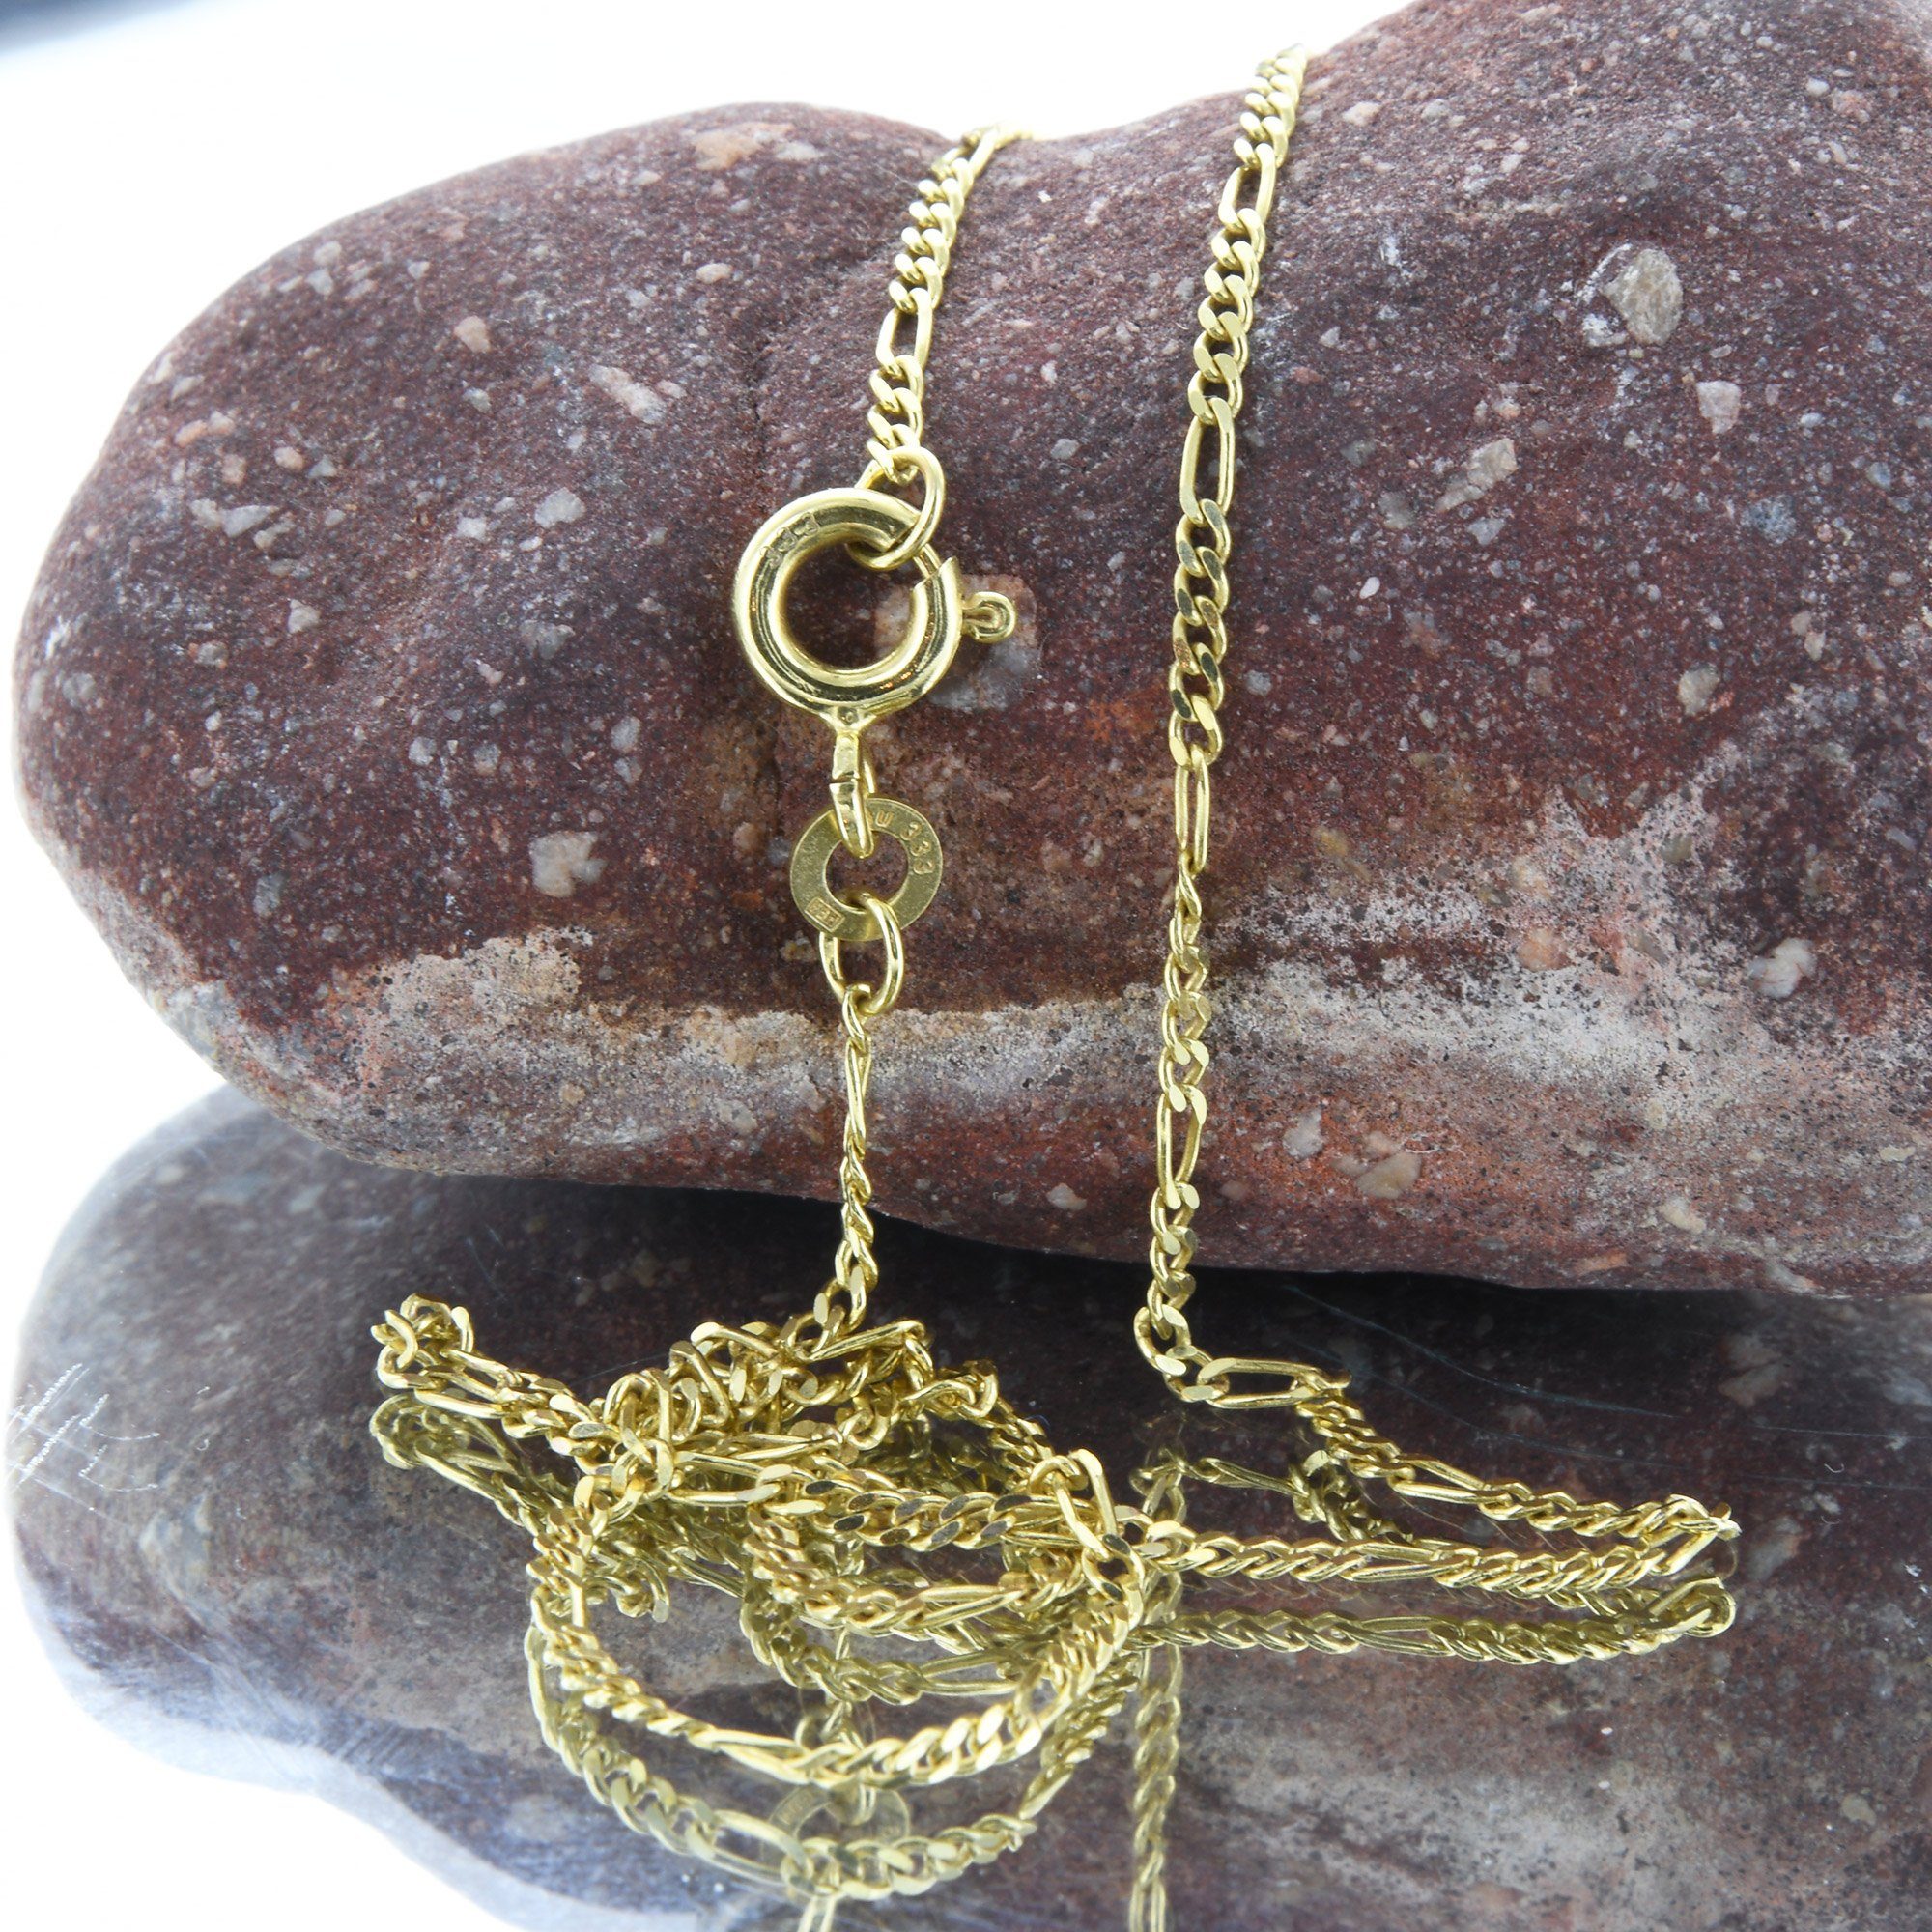 Made Goldkette, HOPLO Germany in